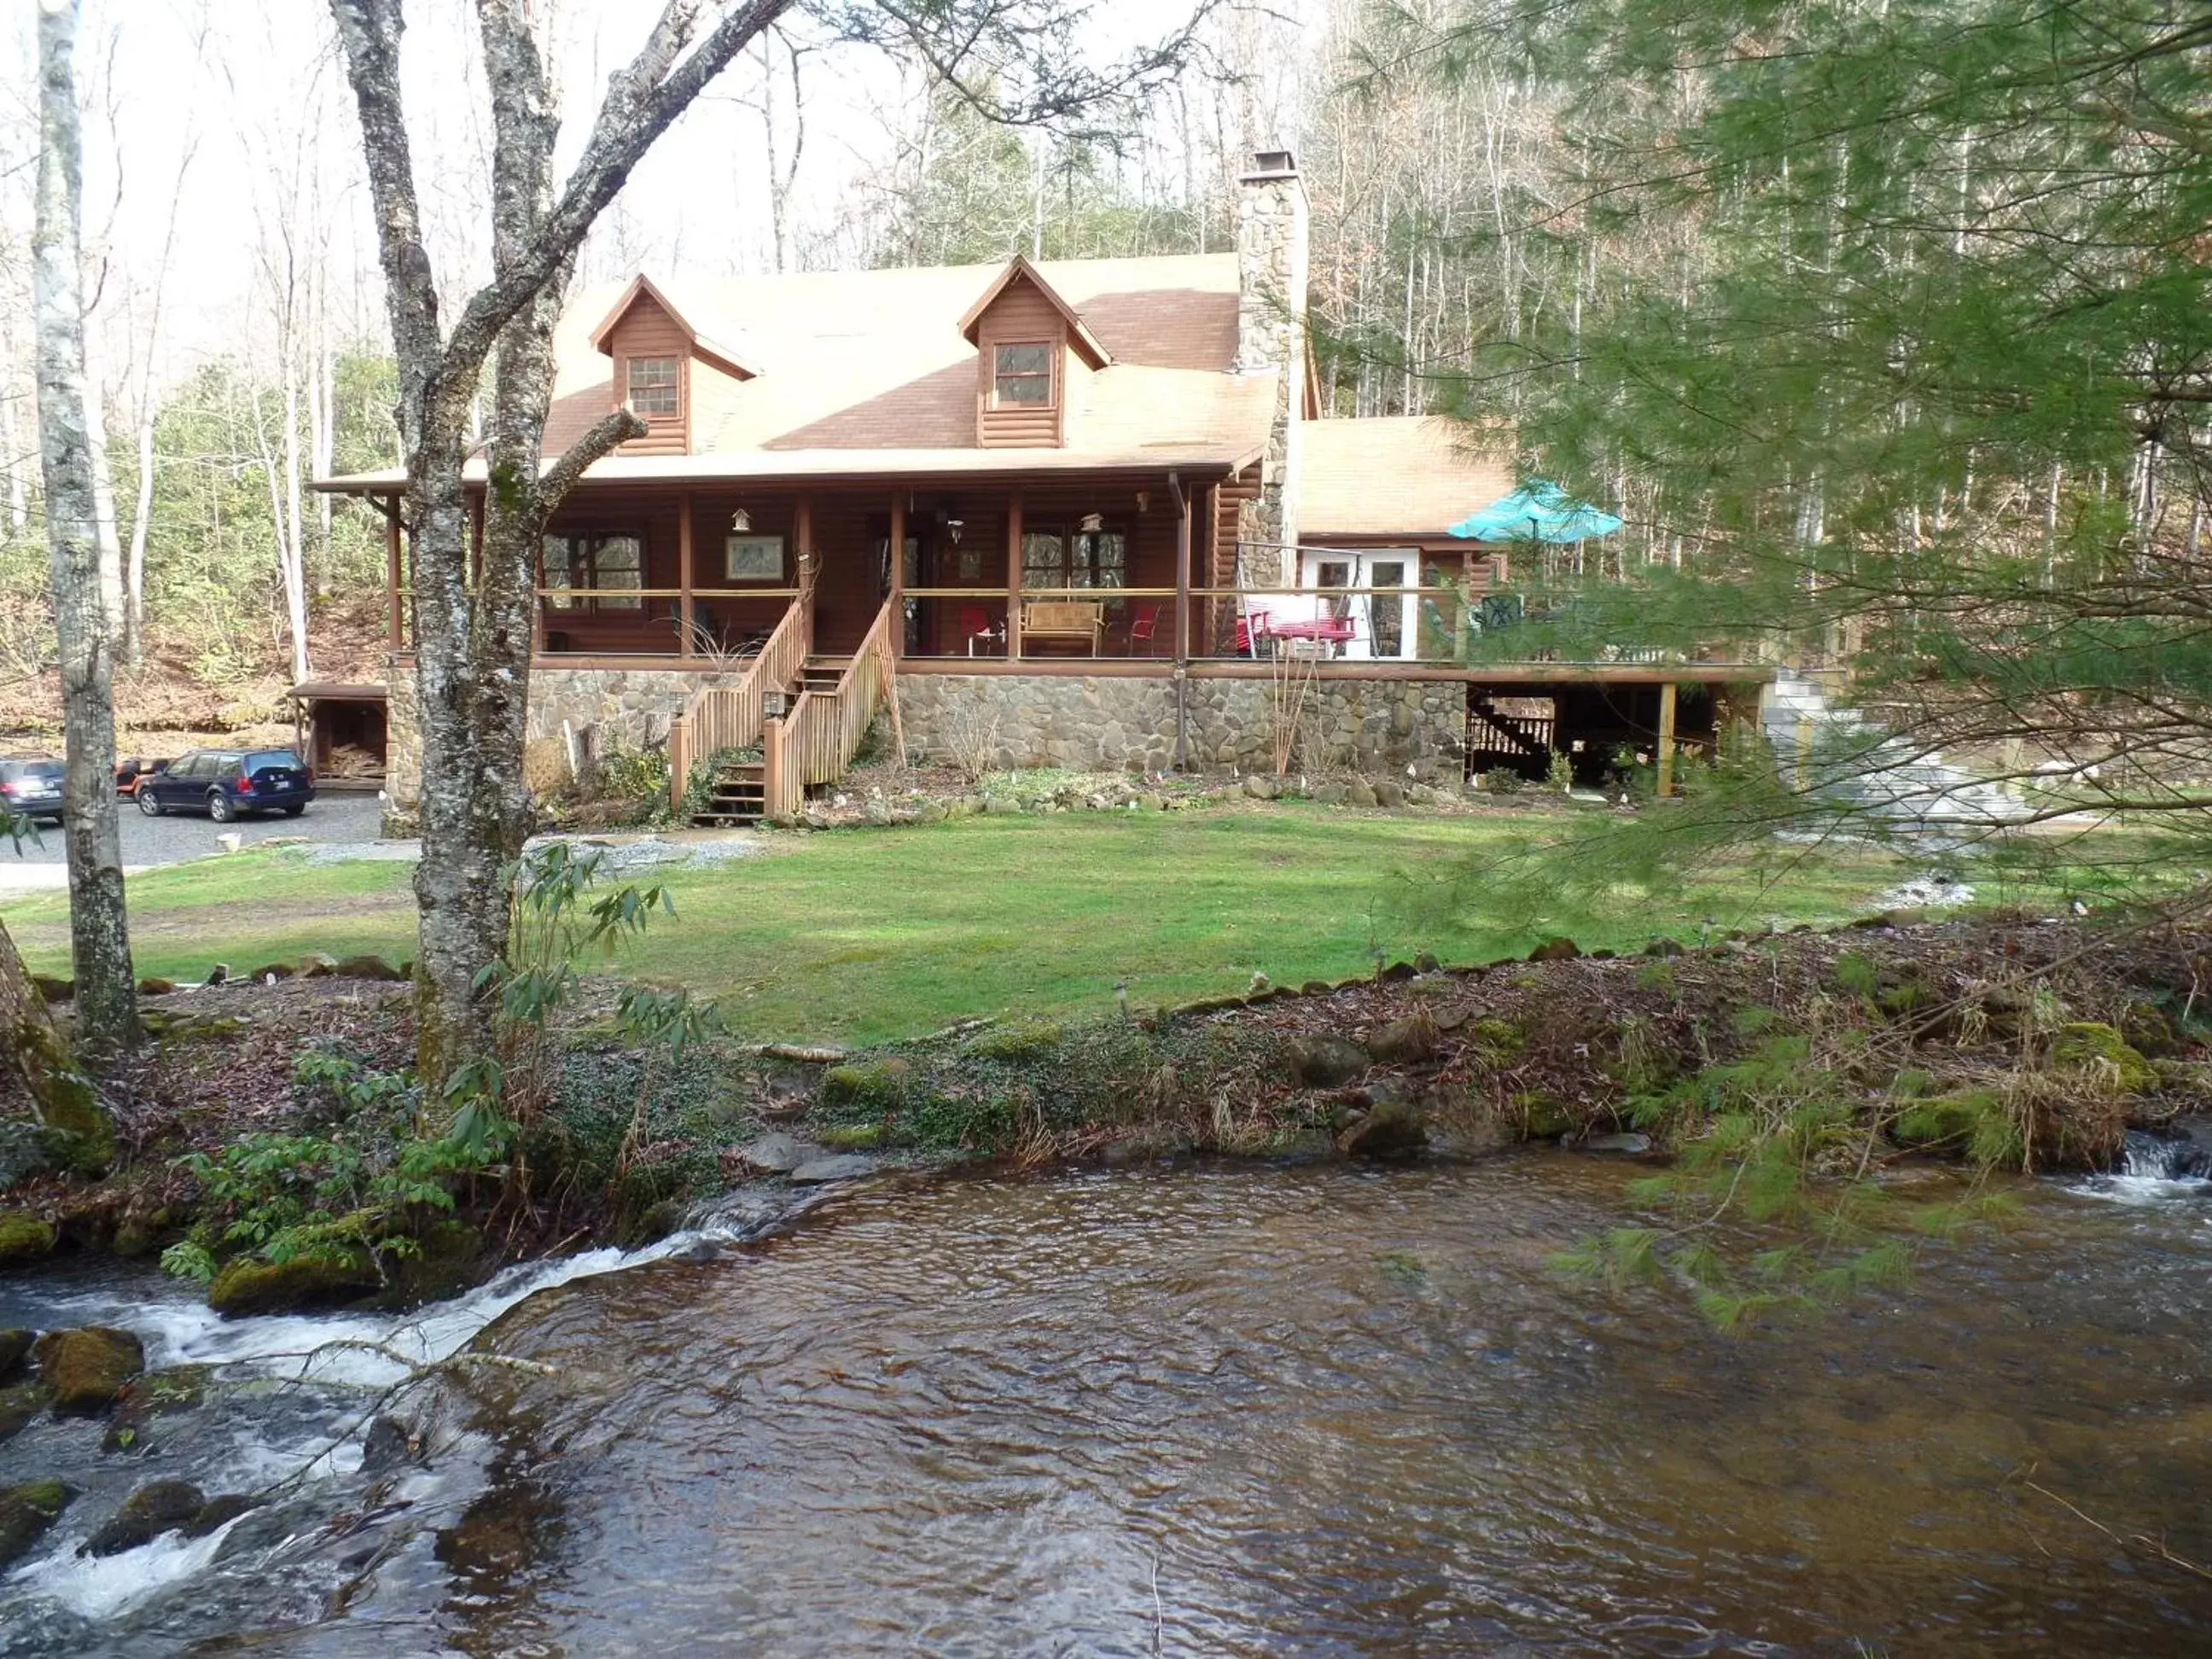 Property Building in Creekside Paradise Bed and Breakfast